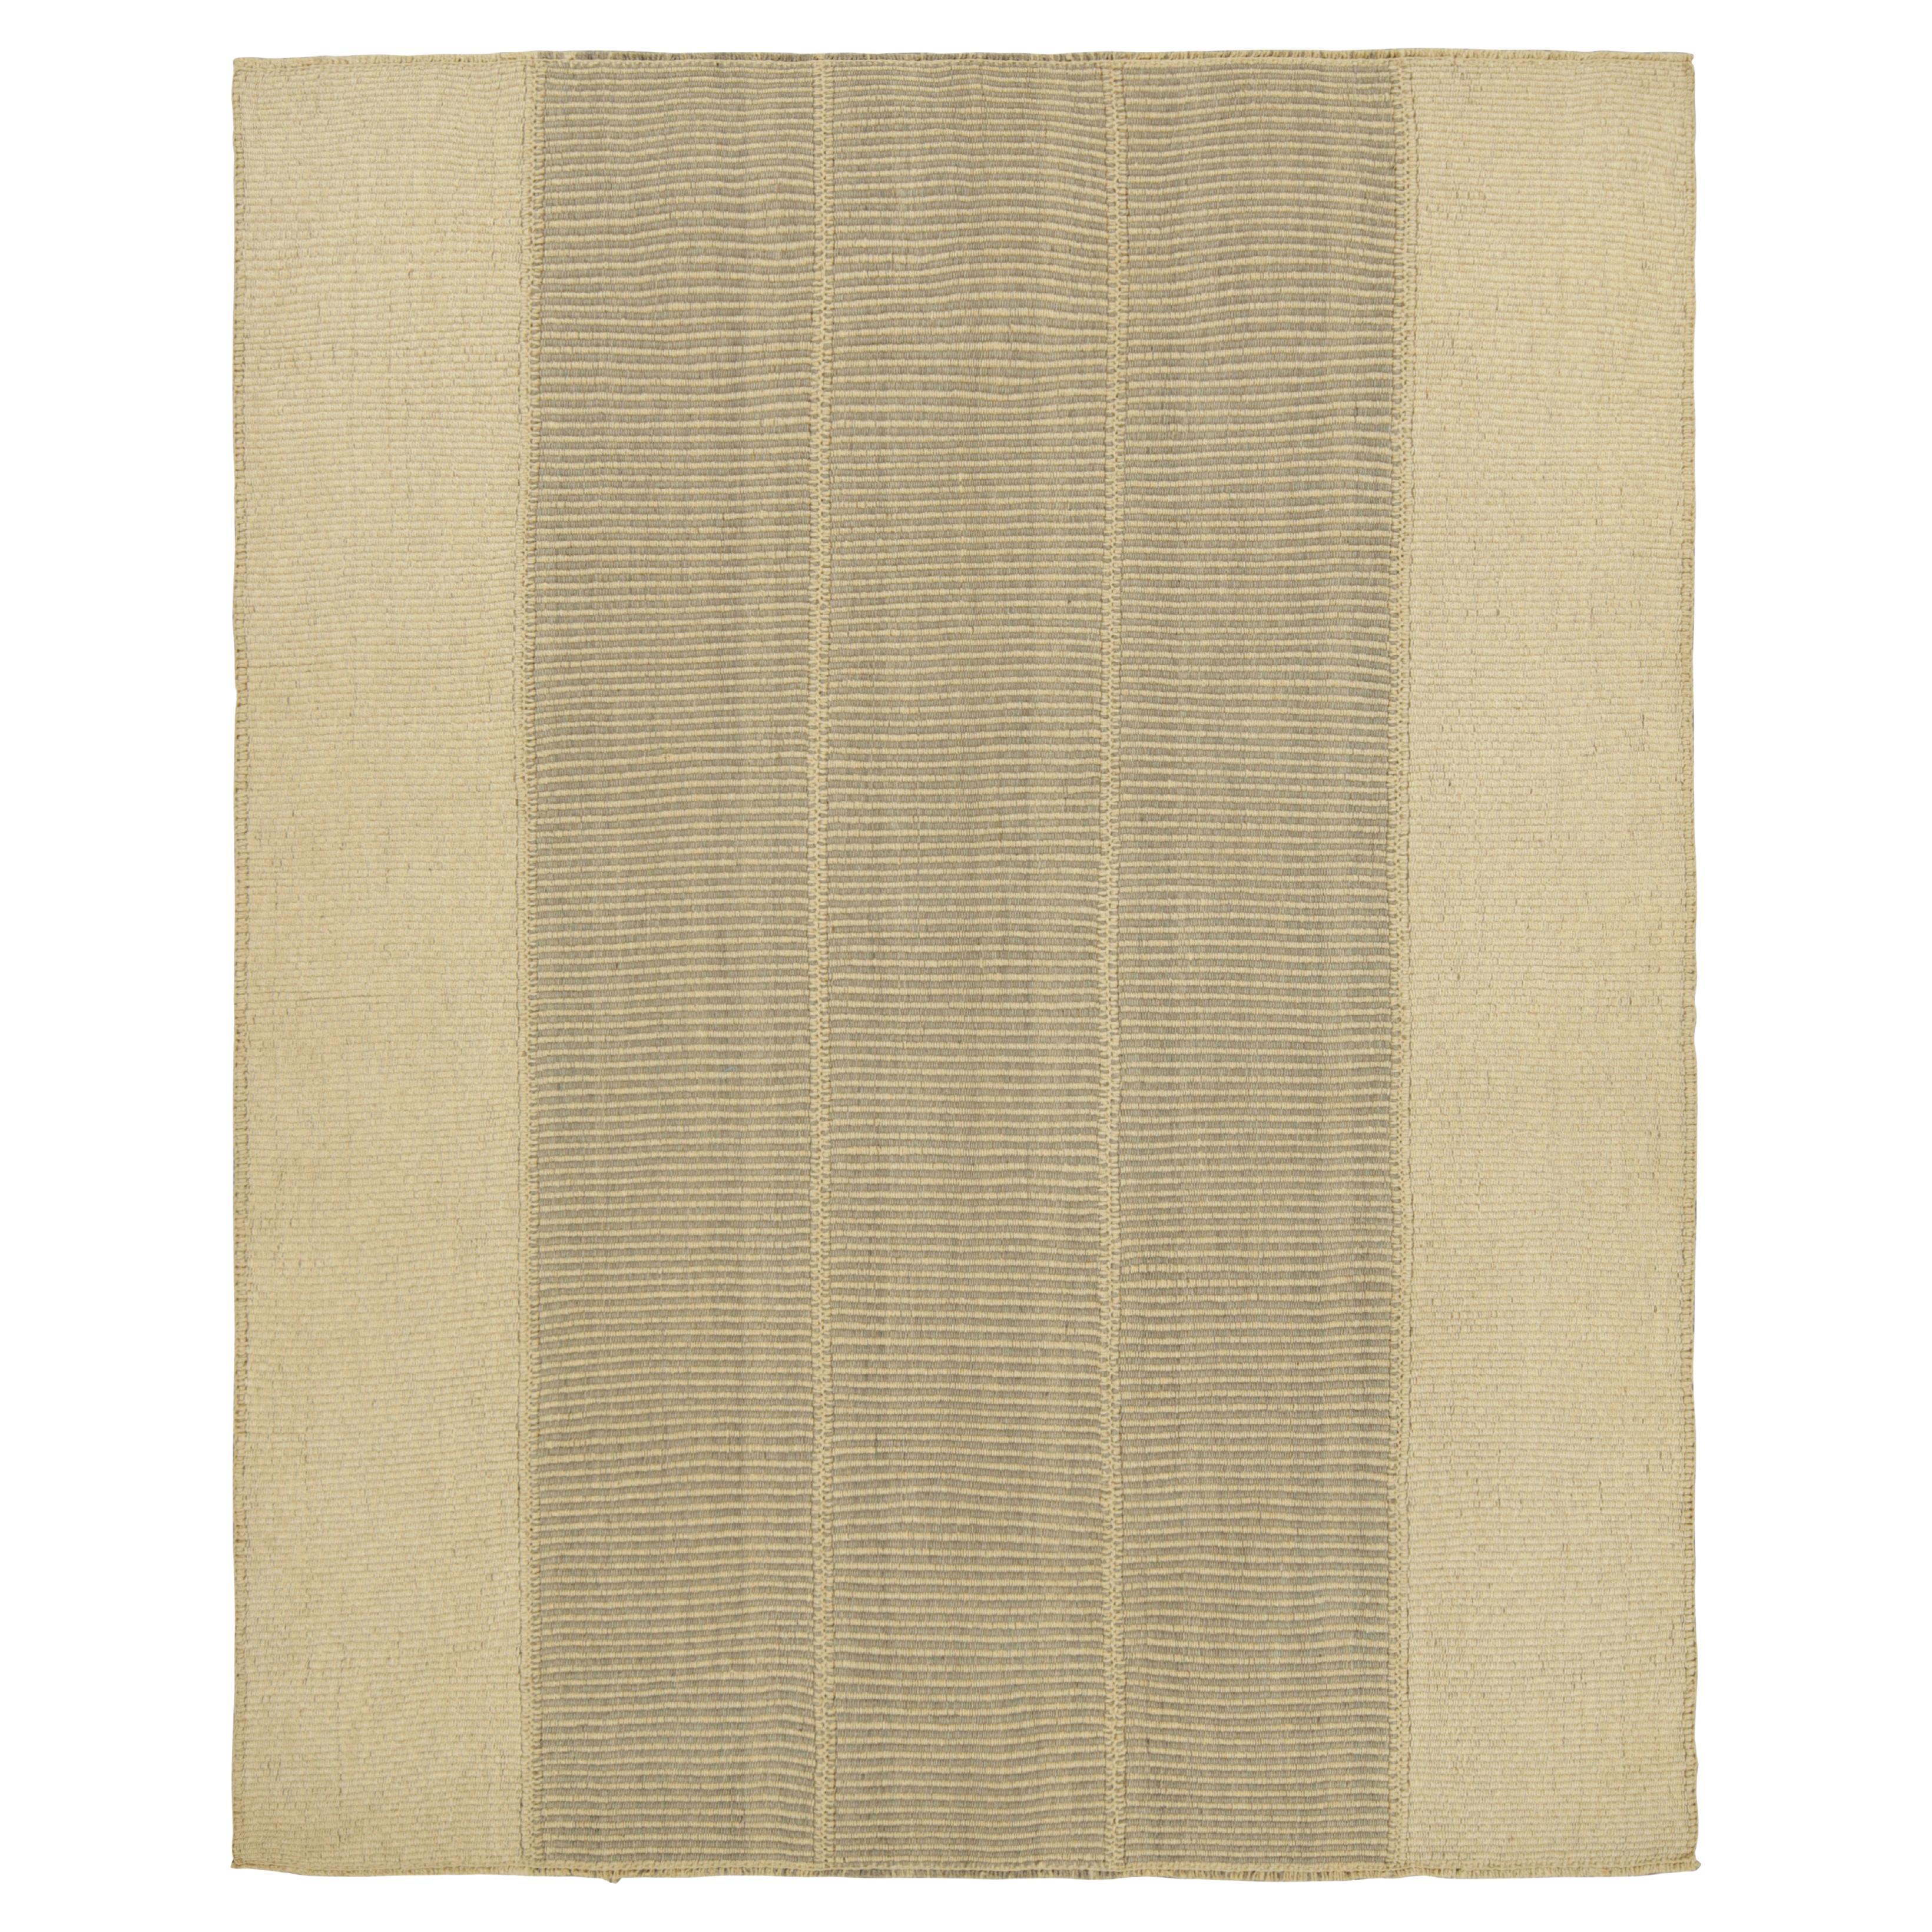 Rug & Kilim’s Contemporary Kilim in Beige and Gray Textural Stripes For Sale